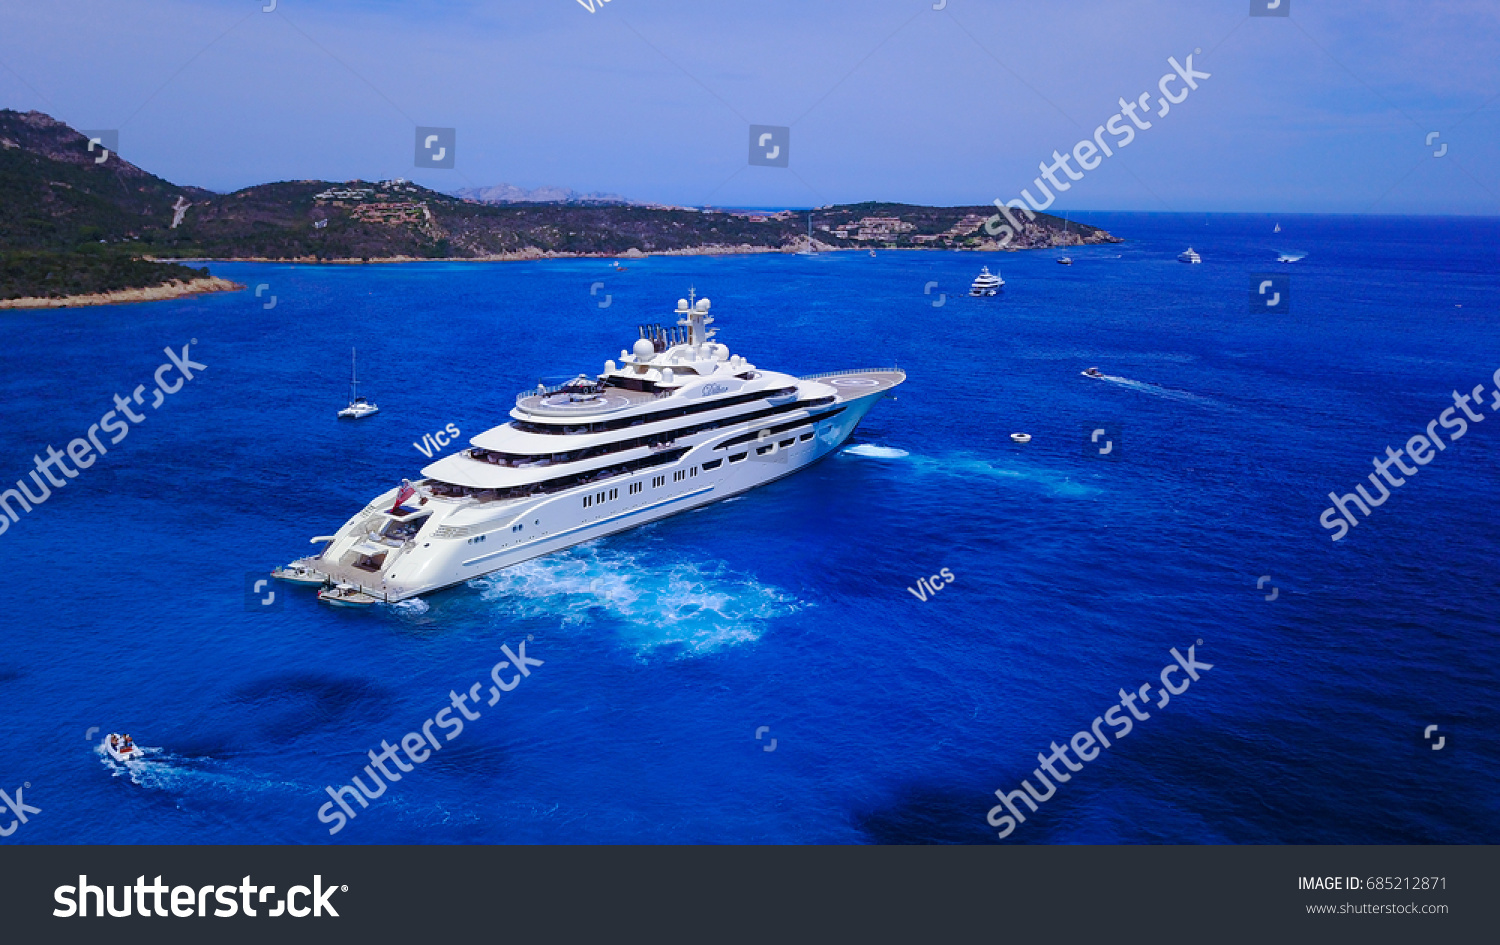 Aerial photograph of Dilbar- biggest yacht in the World, taken on July 27 at noon. #685212871